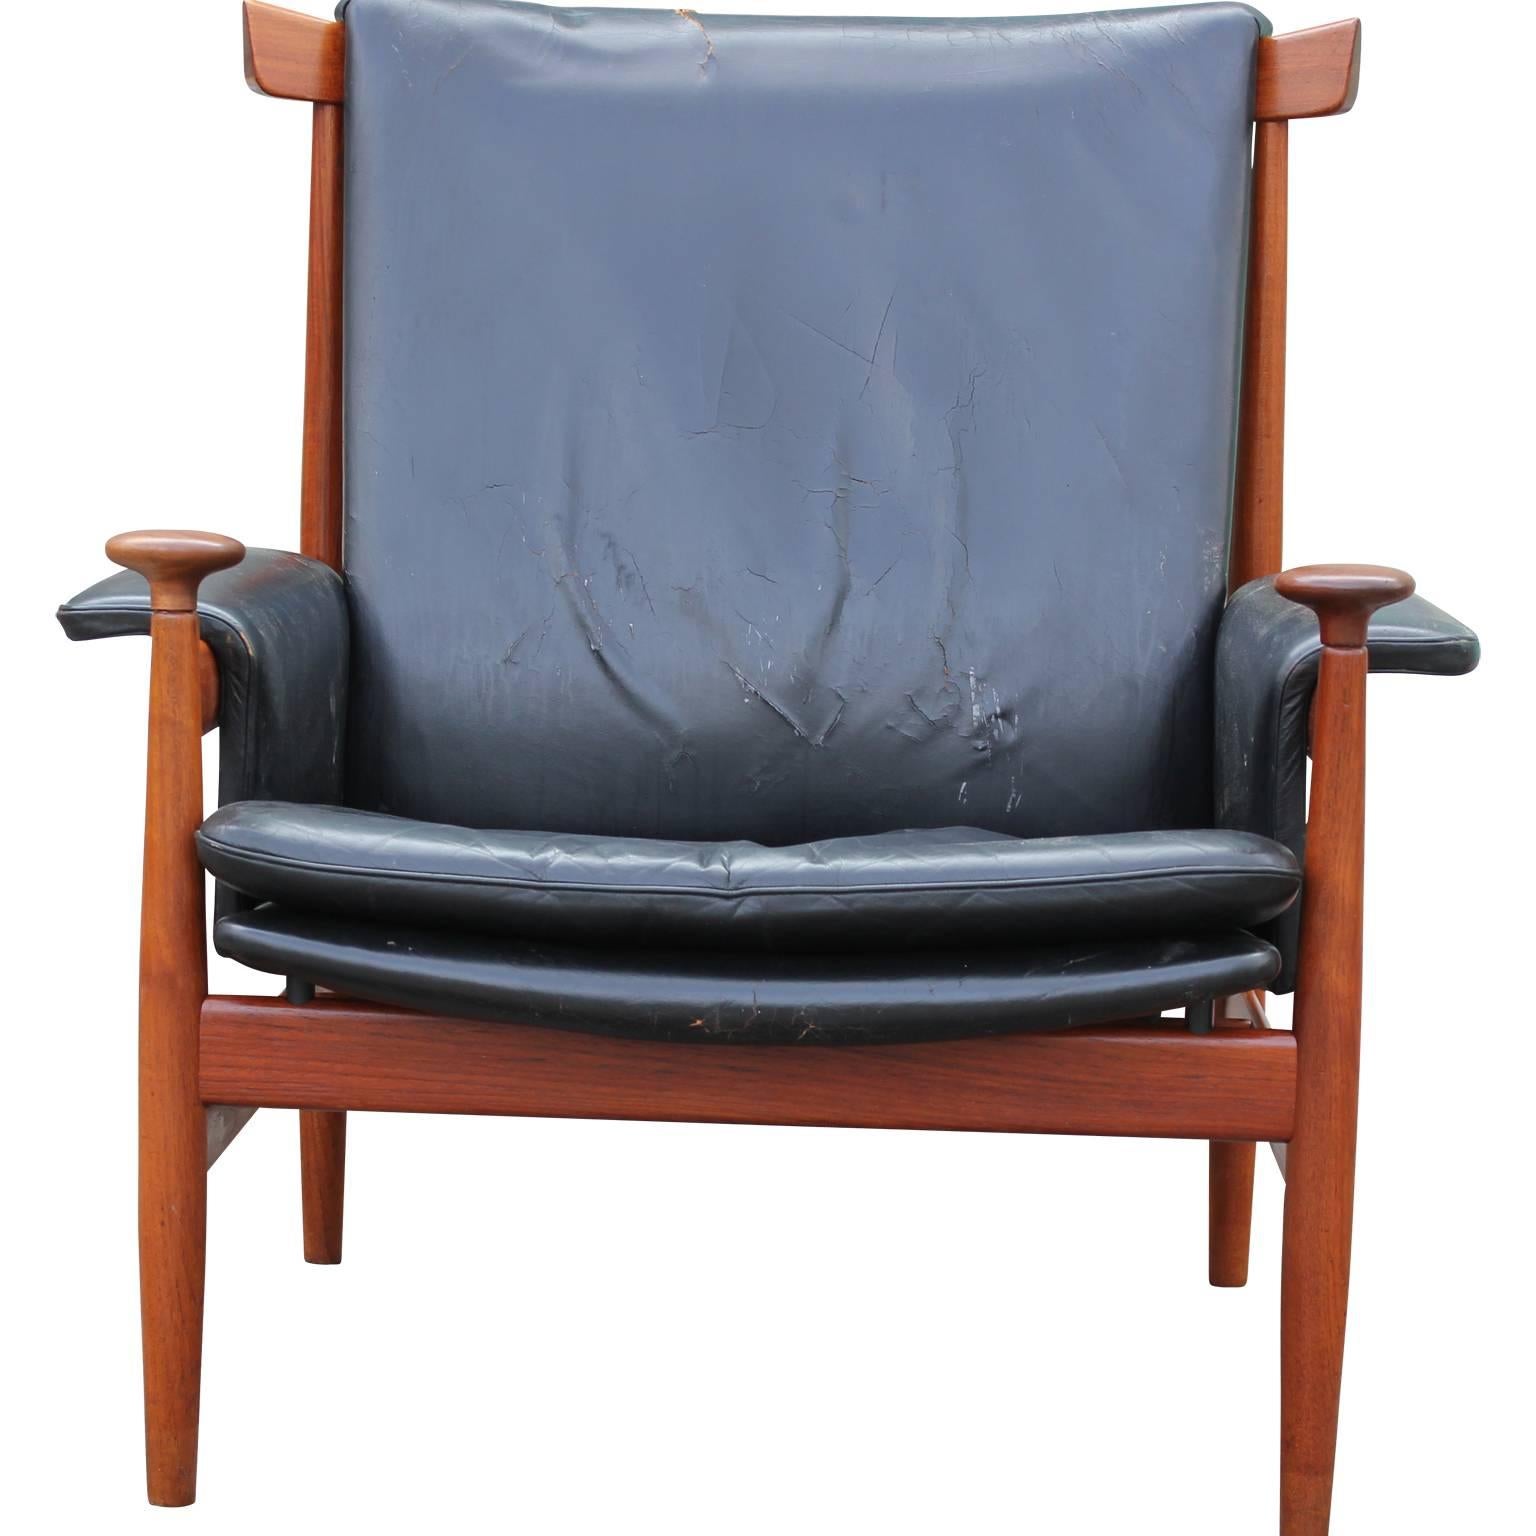 Gorgeous teak 'Bwana' chair by Finn Juhl for France & Sons in original black leather. Imported by John Stewart. There's a little tear in the back but in otherwise nice vintage condition. 

The 